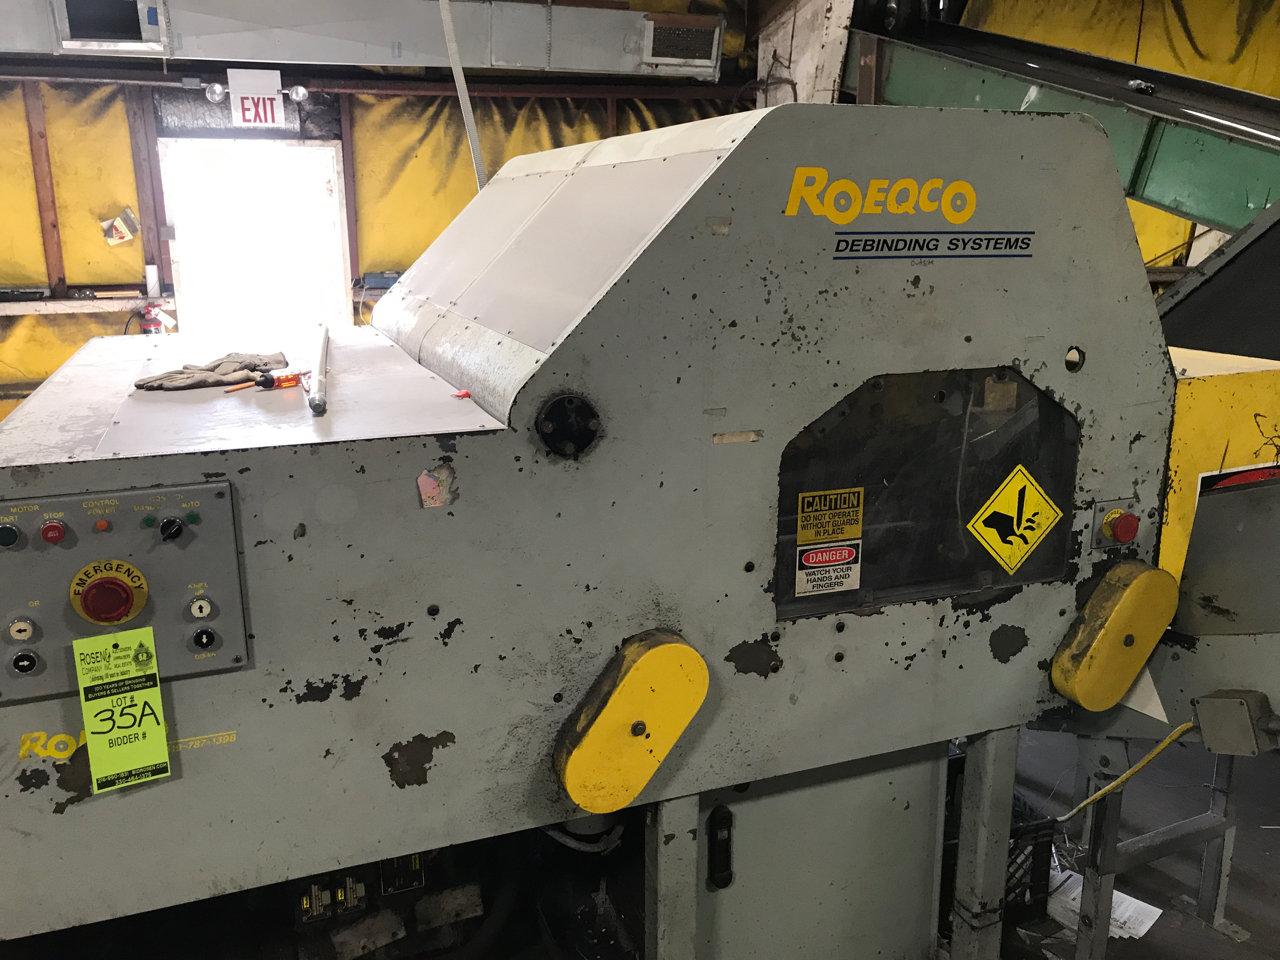 ROEQCO Model 6037 Auto 2 Head Book Debinding Machine for recycling books and magazines